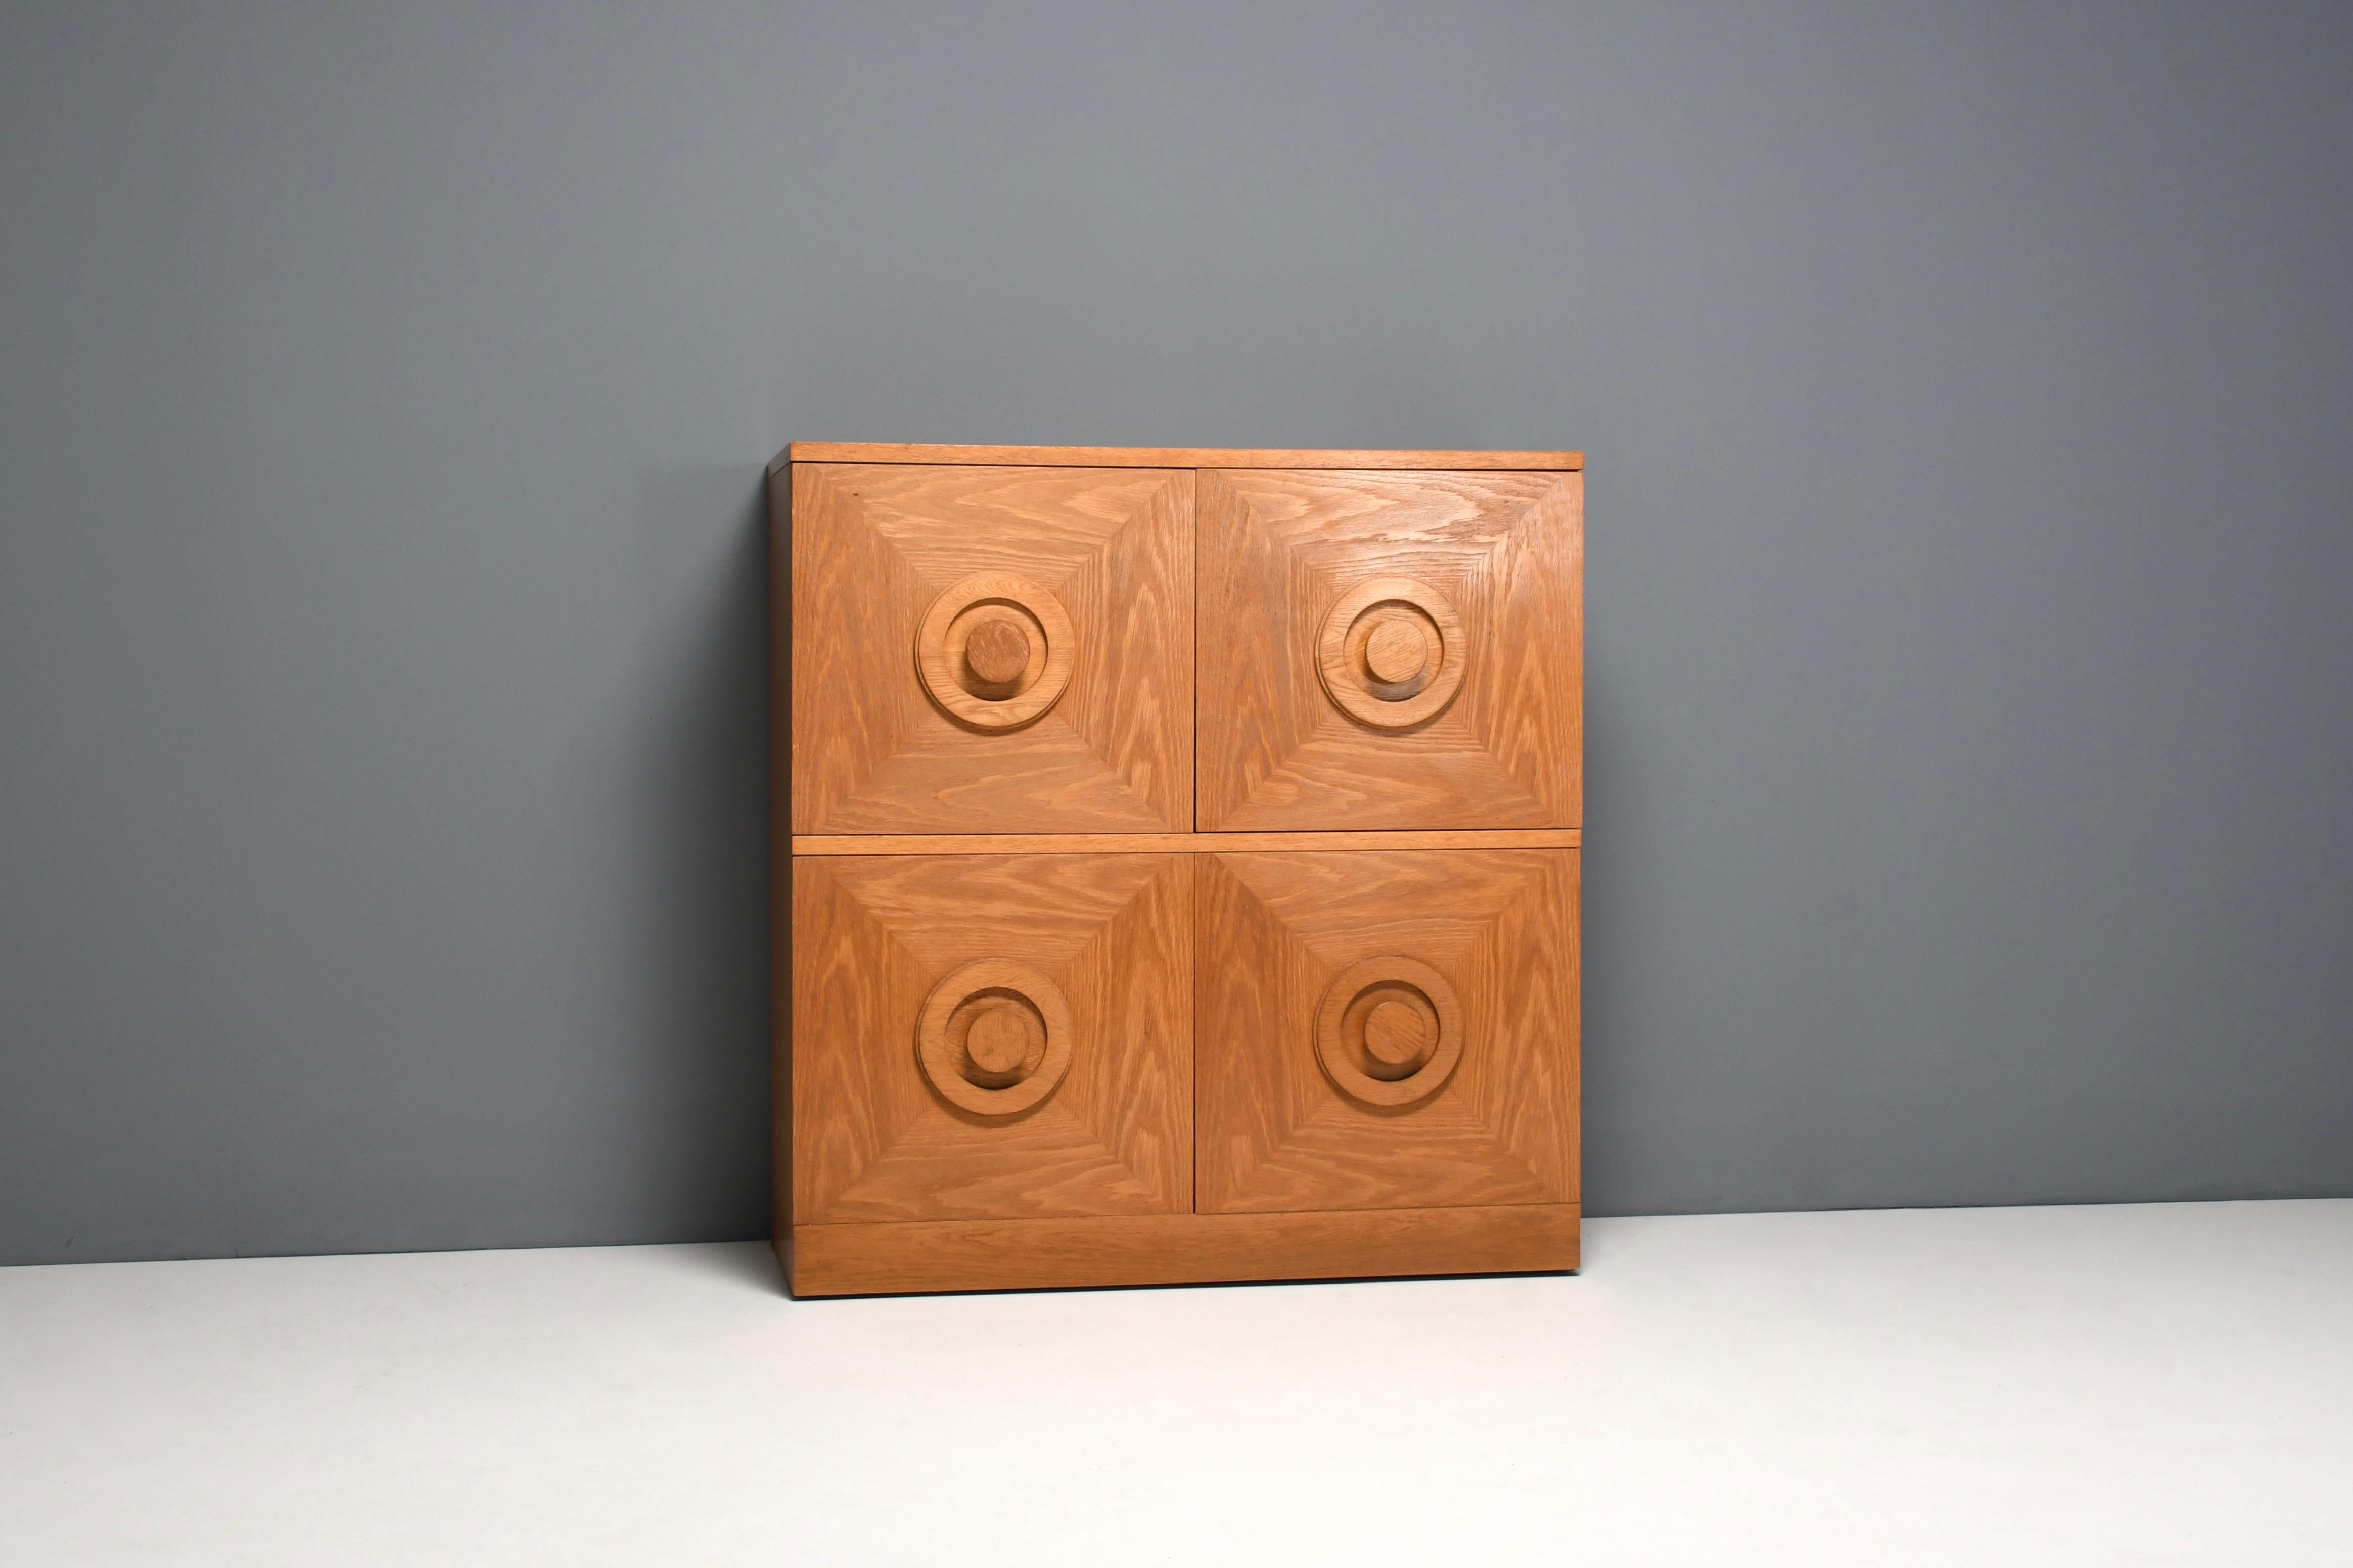 Beautiful brutalist cabinet in very good condition. 

Made in Belgium in the 1970s 

This sideboard has four doors made in a natural oak veneer, each door has a three-dimensional pattern.

The body of the cabinet is also made from oak veneer.